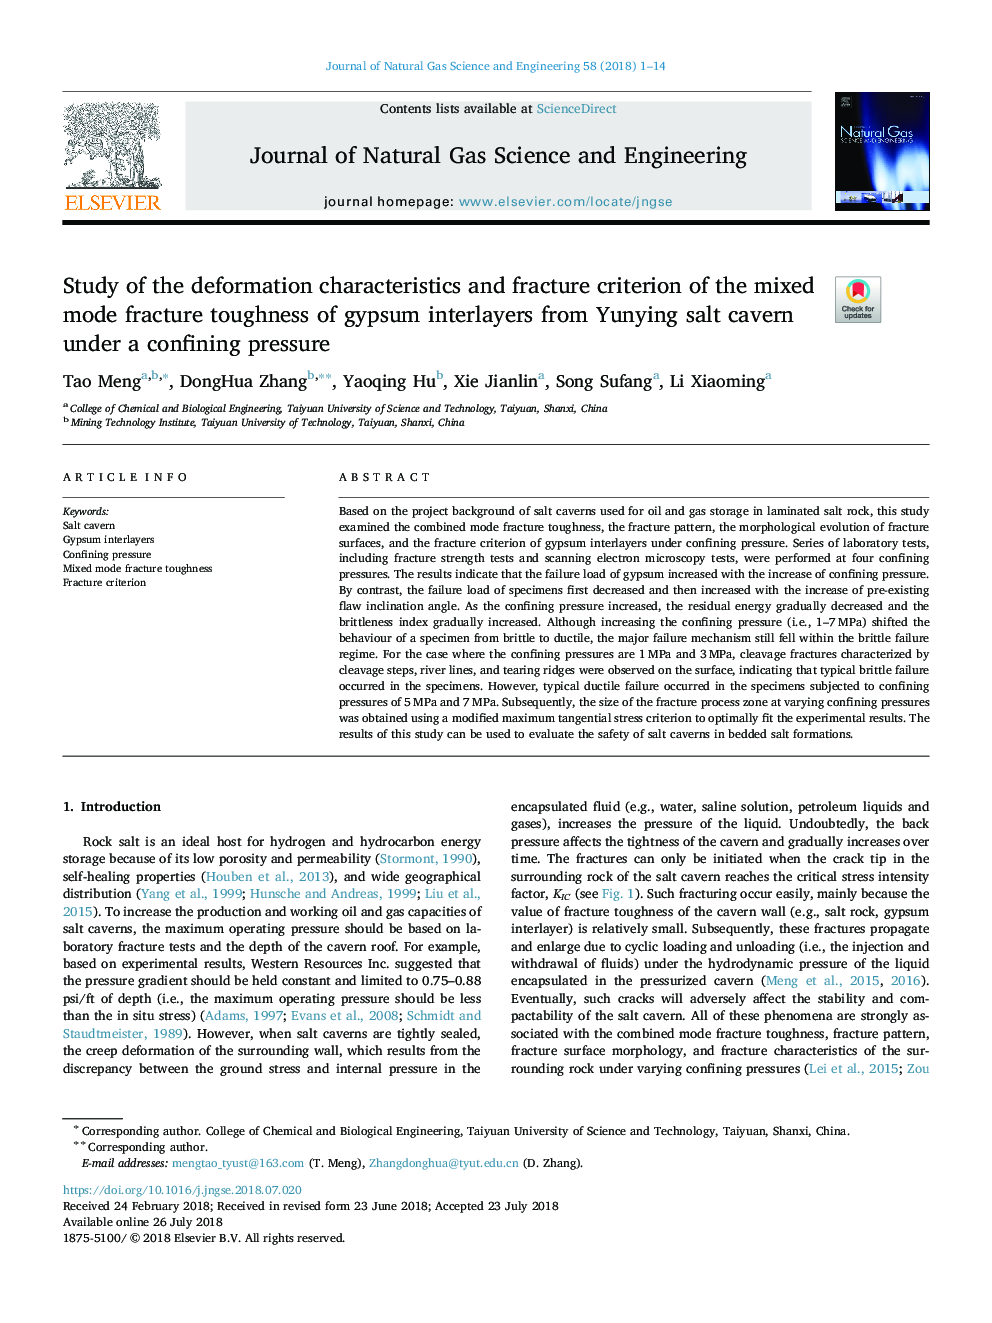 Study of the deformation characteristics and fracture criterion of the mixed mode fracture toughness of gypsum interlayers from Yunying salt cavern under a confining pressure